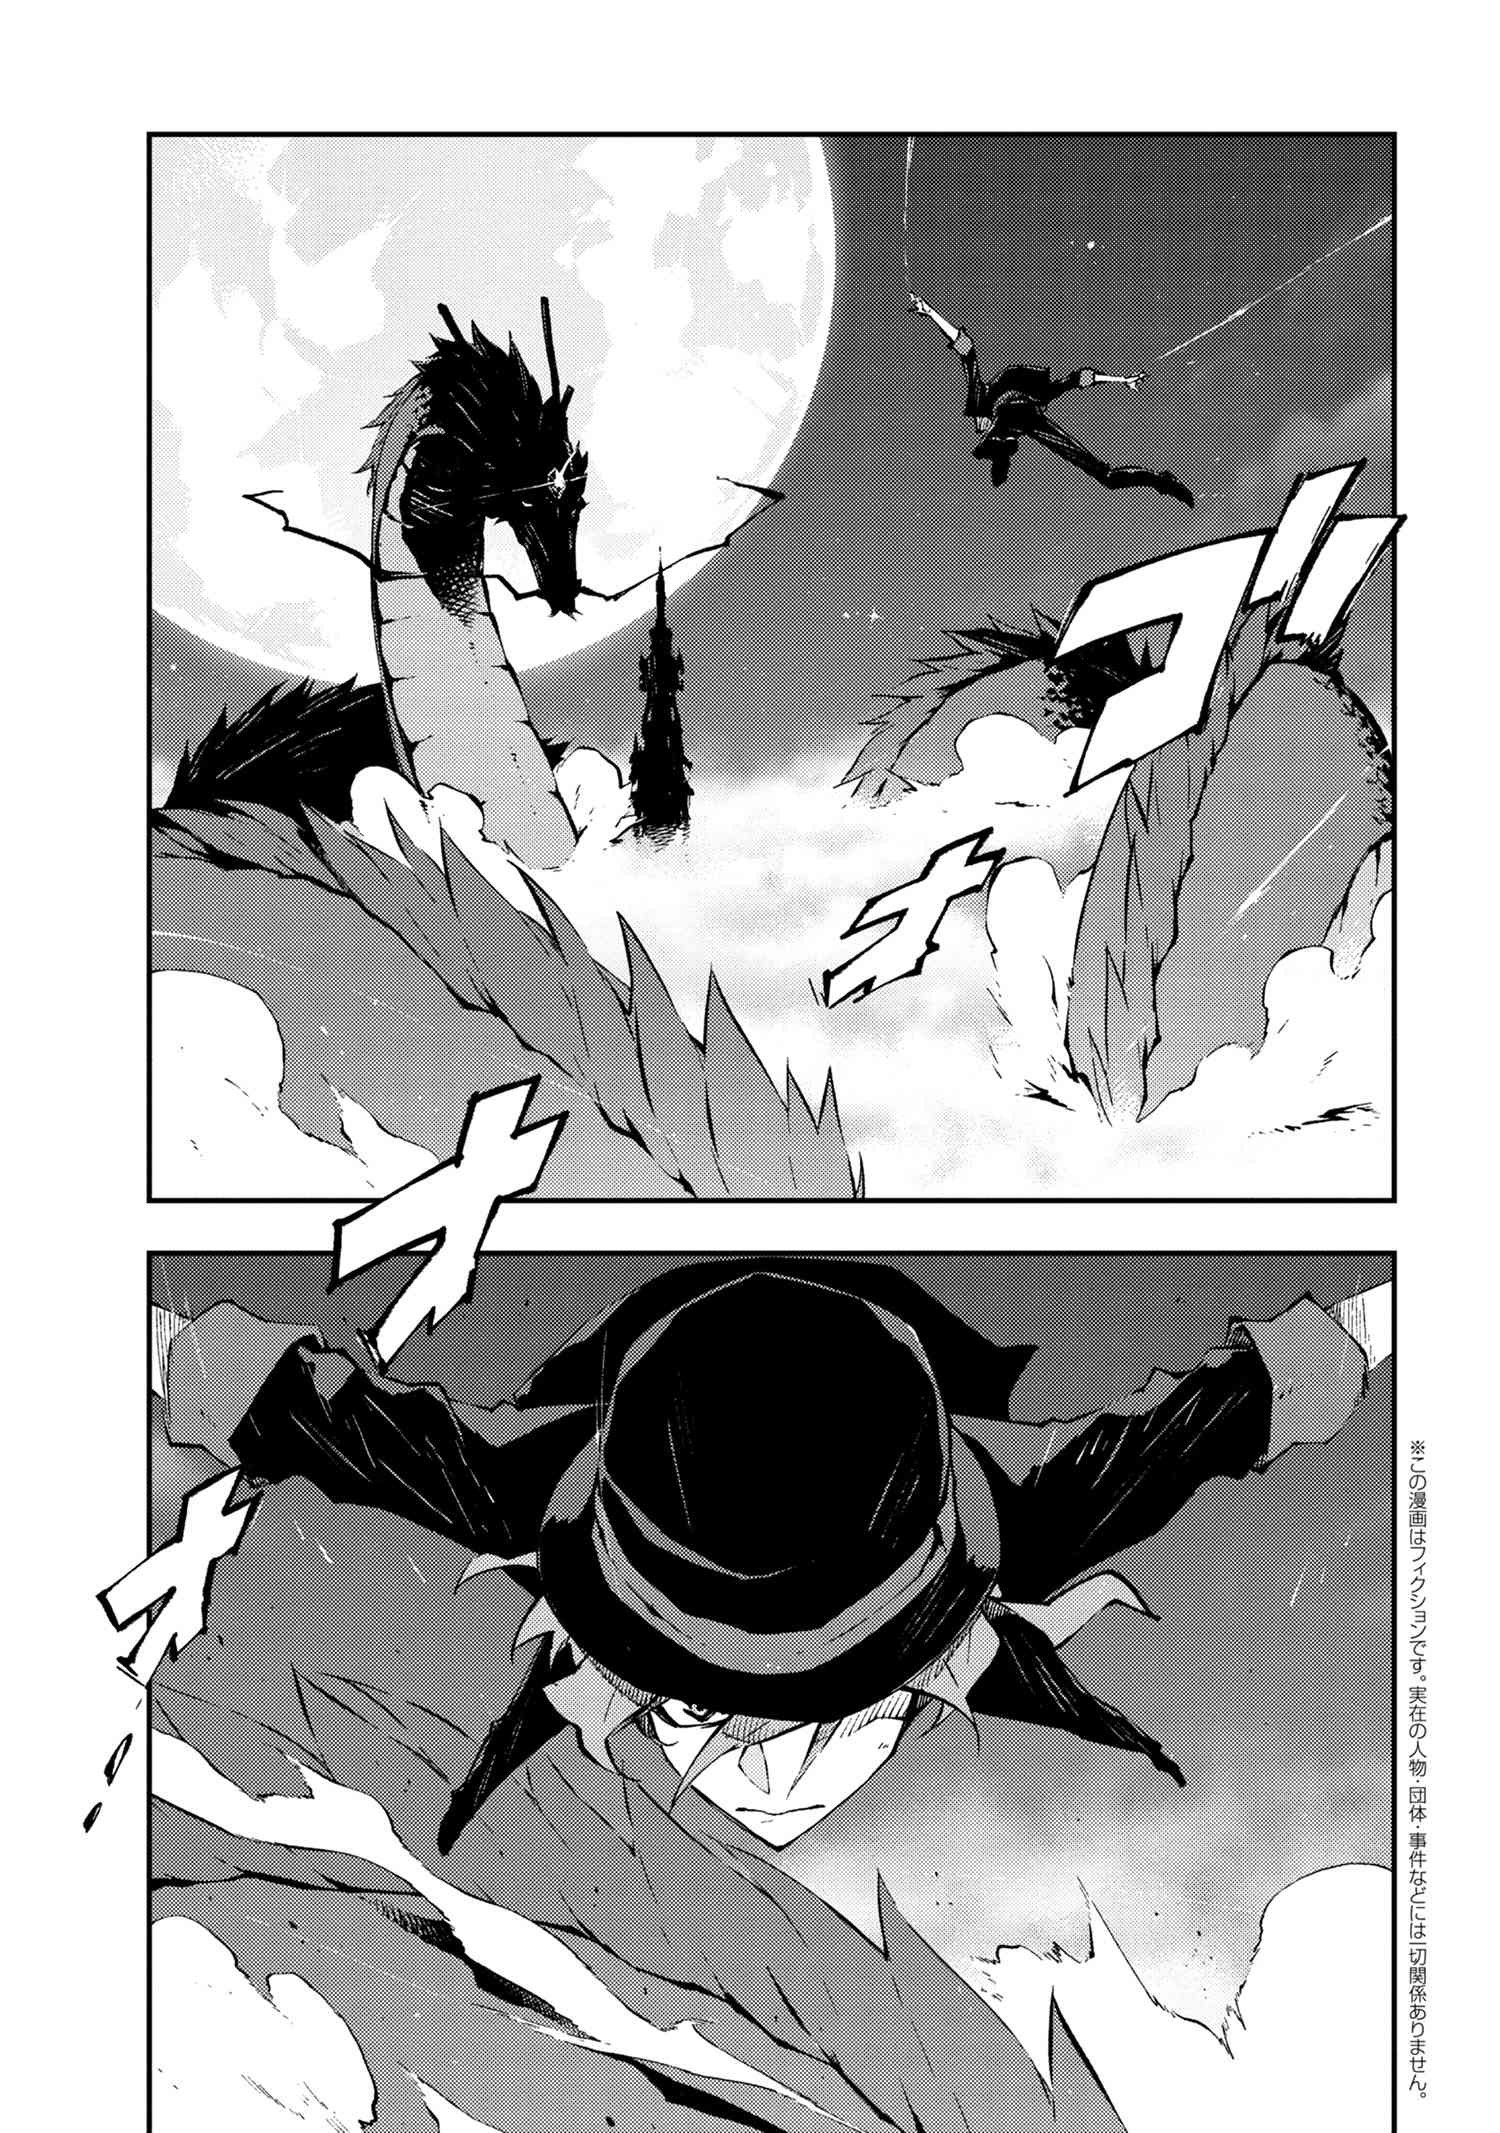 Bungou Stray Dogs: Dead Apple - Chapter 13-2 - Page 1